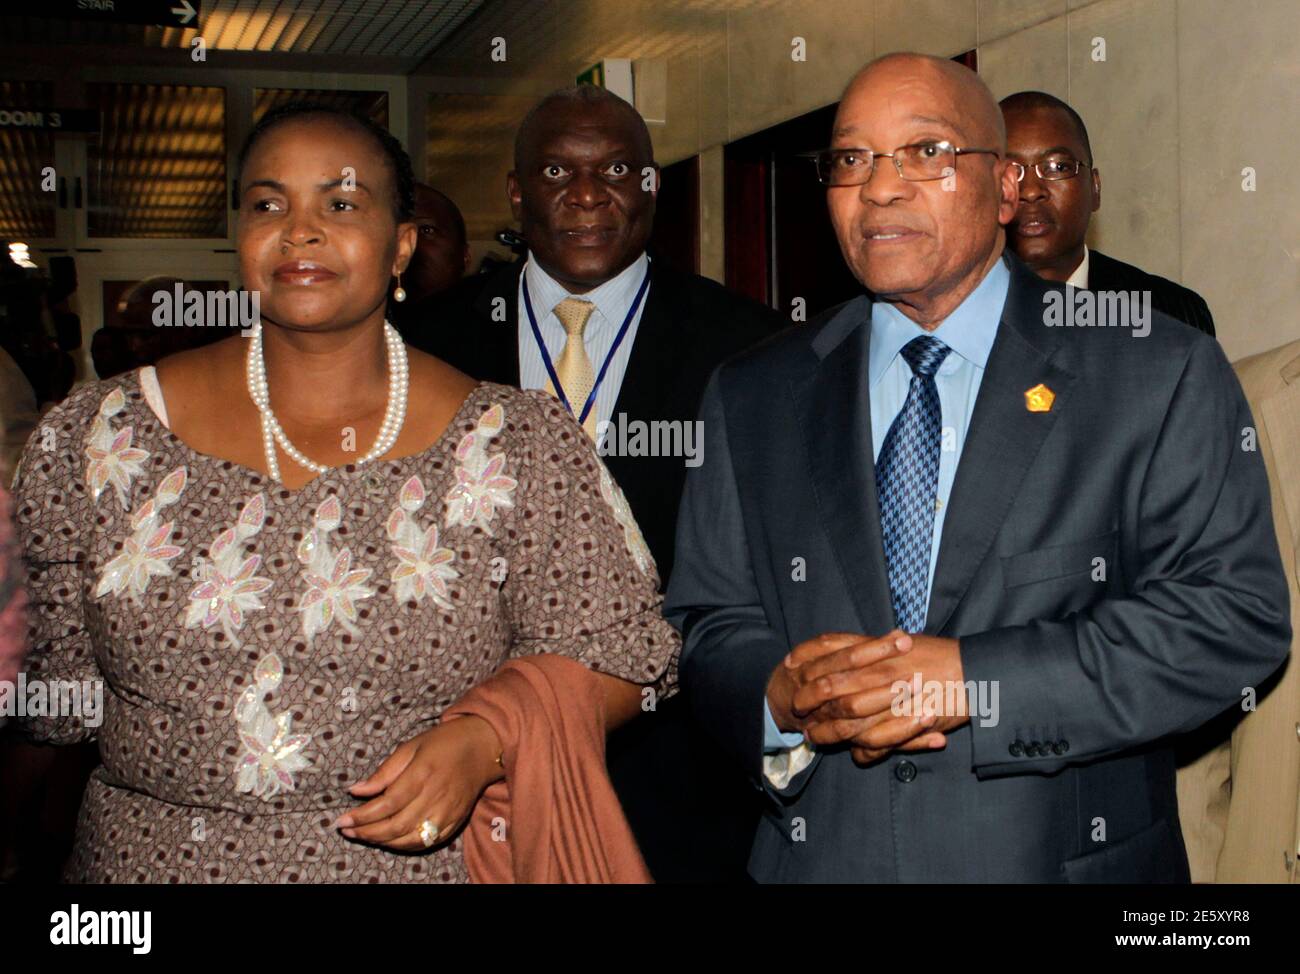 South Africa's President Jacob Zuma (R) talks to his International Relations Minister Maite Nkoana-Mashabane as they arrive at the 16th African Union Summit, in Ethiopia's capital Addis Ababa, January 31, 2011. The presidents of South Africa, Tanzania, Mauritania, Burkina Faso and Chad will form a high-level panel tasked with resolving Ivory Coast's leadership dispute, an African Union official said on Monday. REUTERS/Thomas Mukoya (ETHIOPIA - Tags: SOCIETY POLITICS) Stock Photo